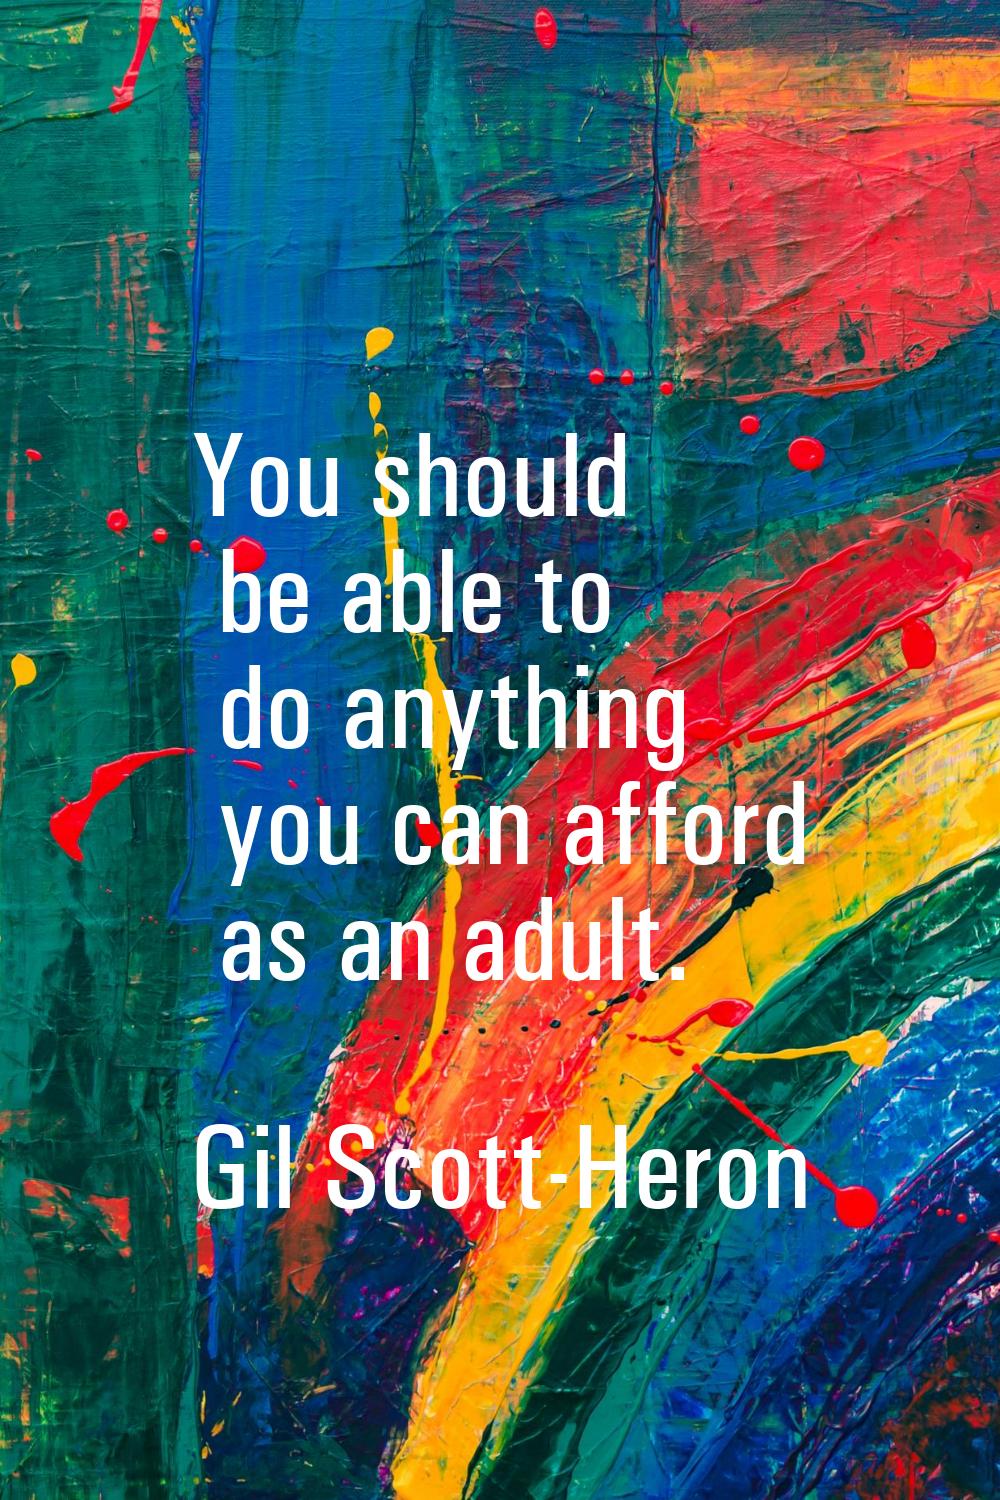 You should be able to do anything you can afford as an adult.